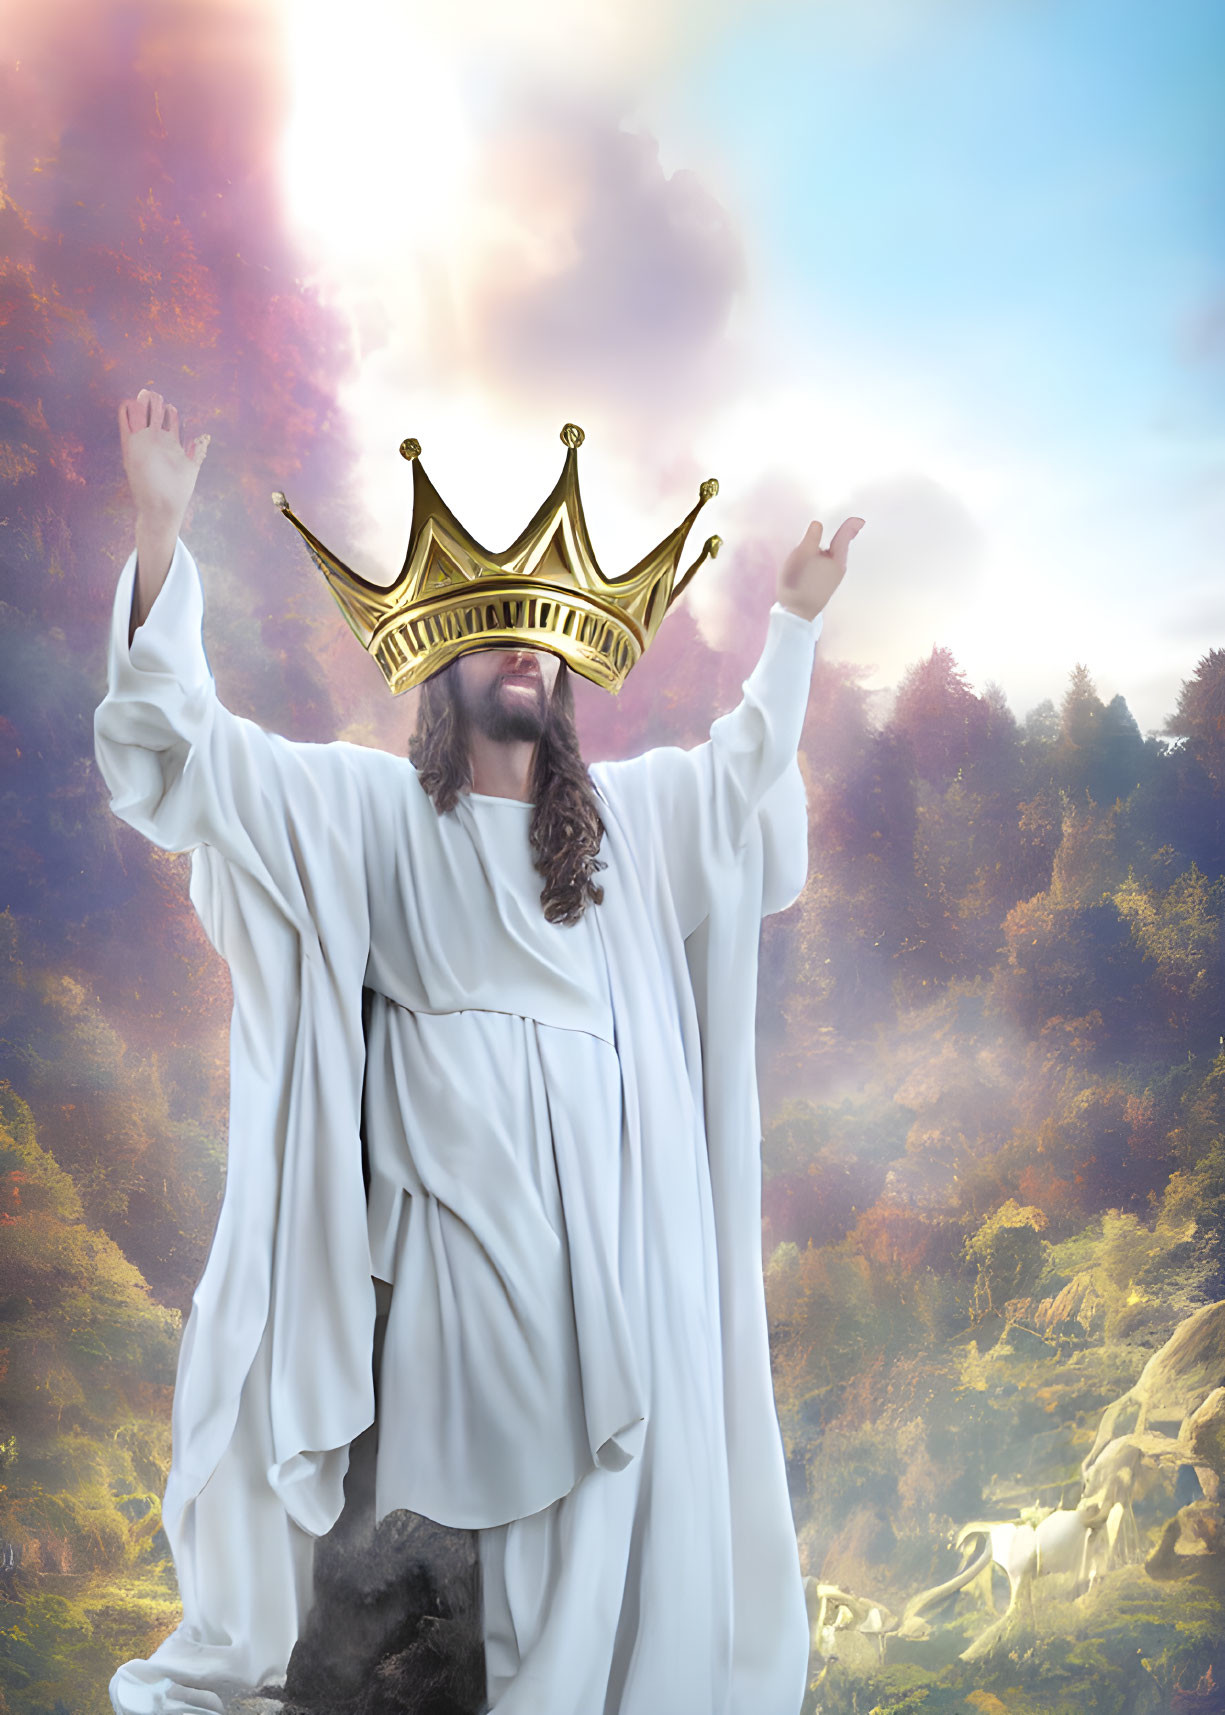 Person in white robes with raised arms and golden crown against surreal cloudy backdrop.